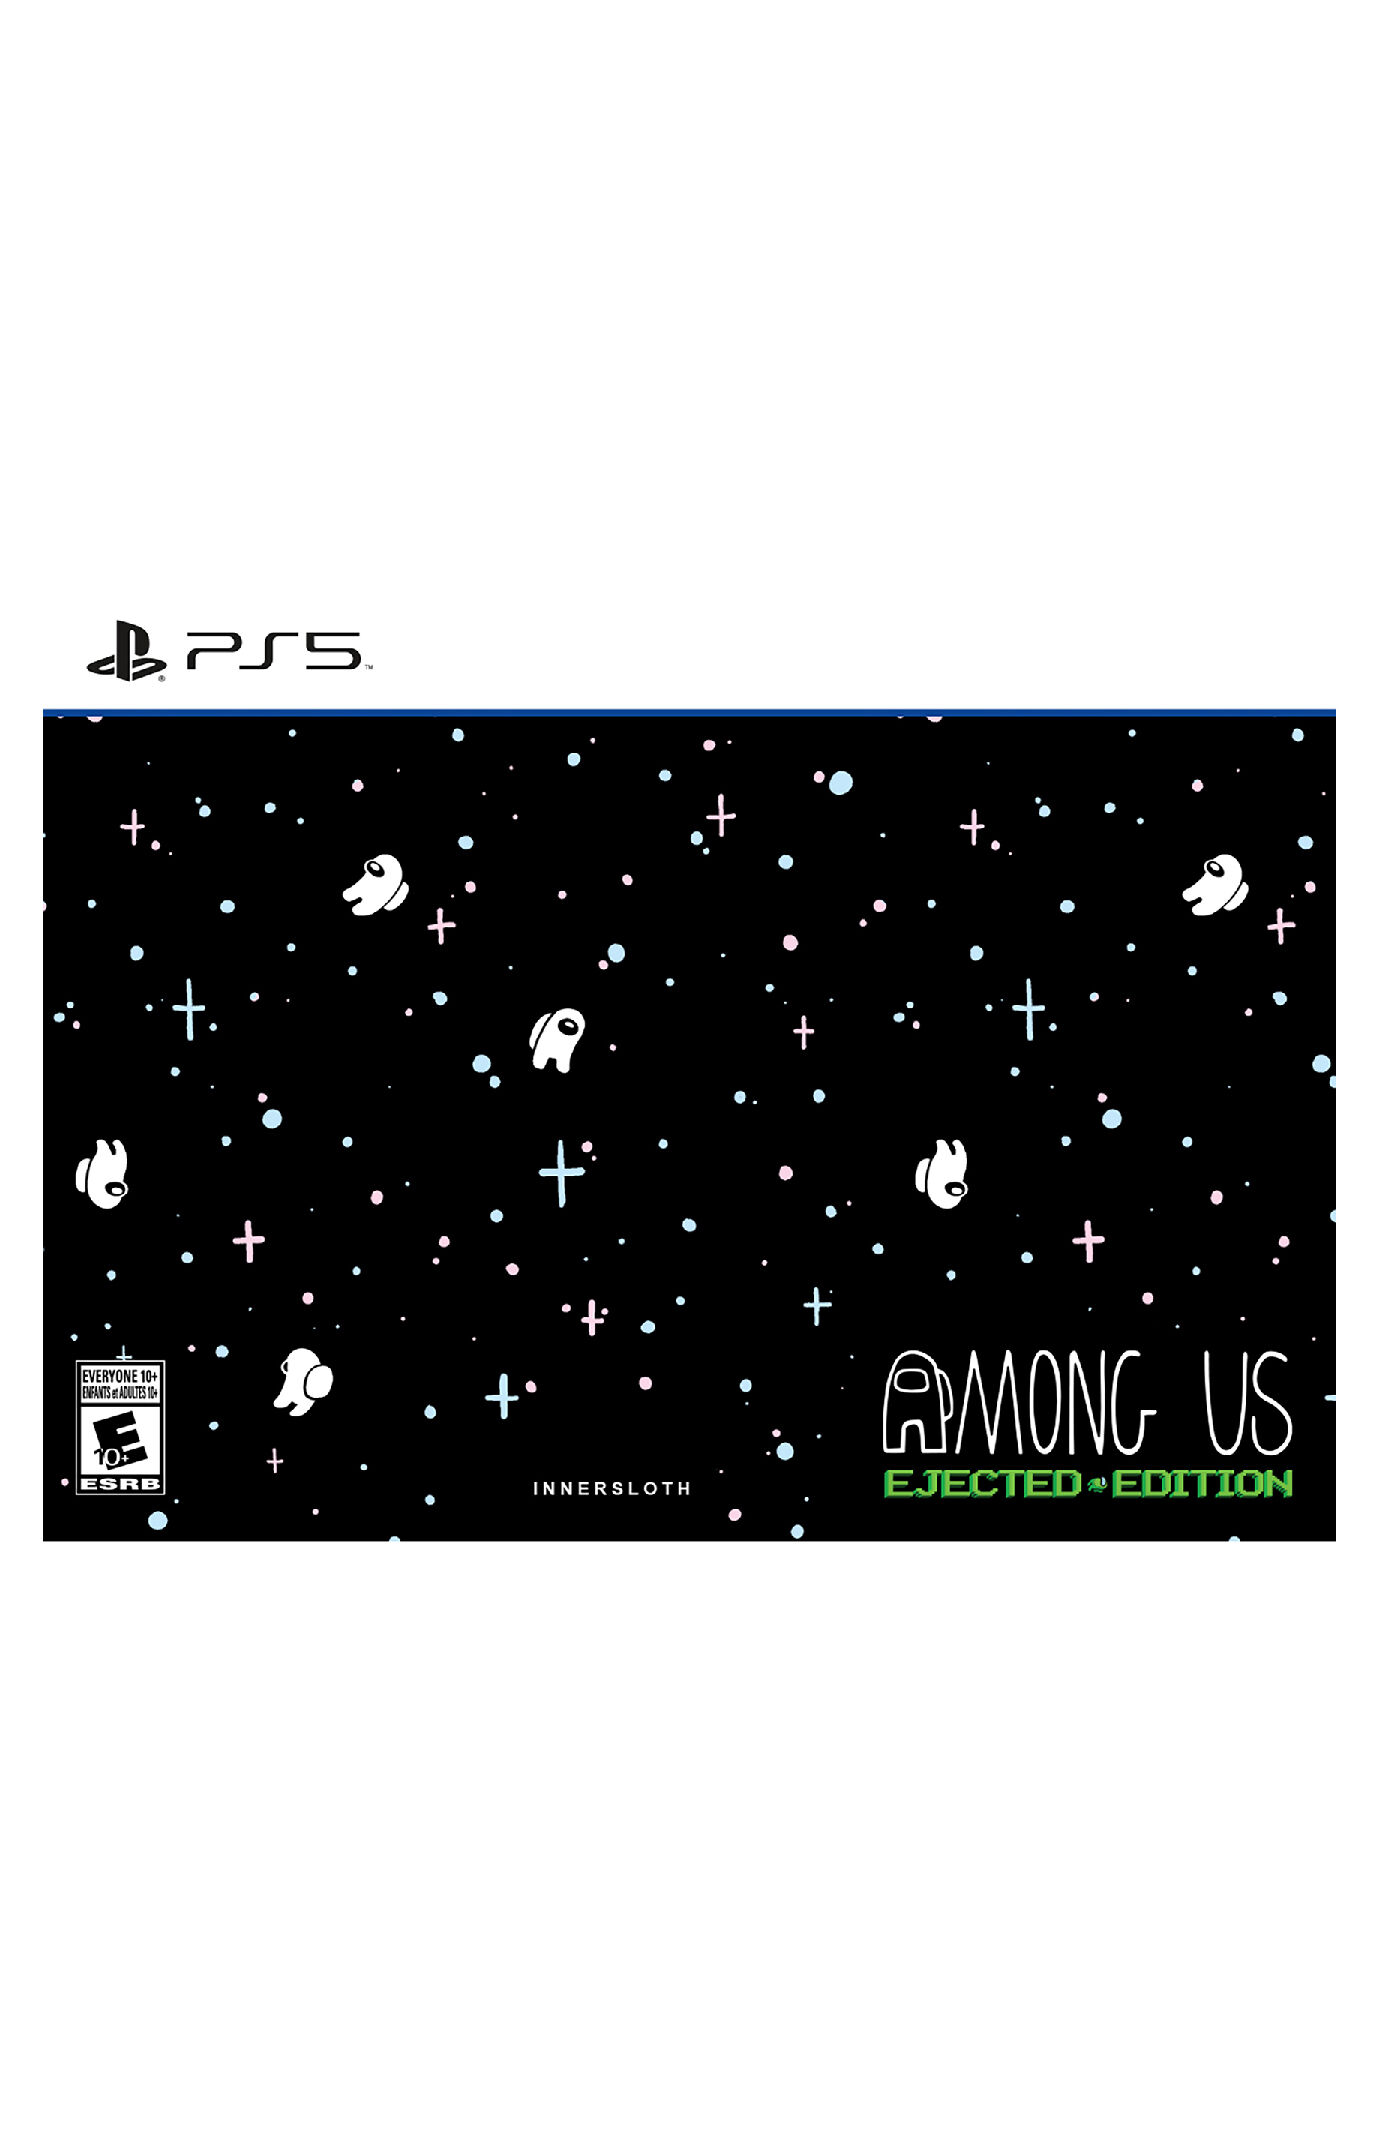 Among Us: Ejected Edition for PlayStation 5